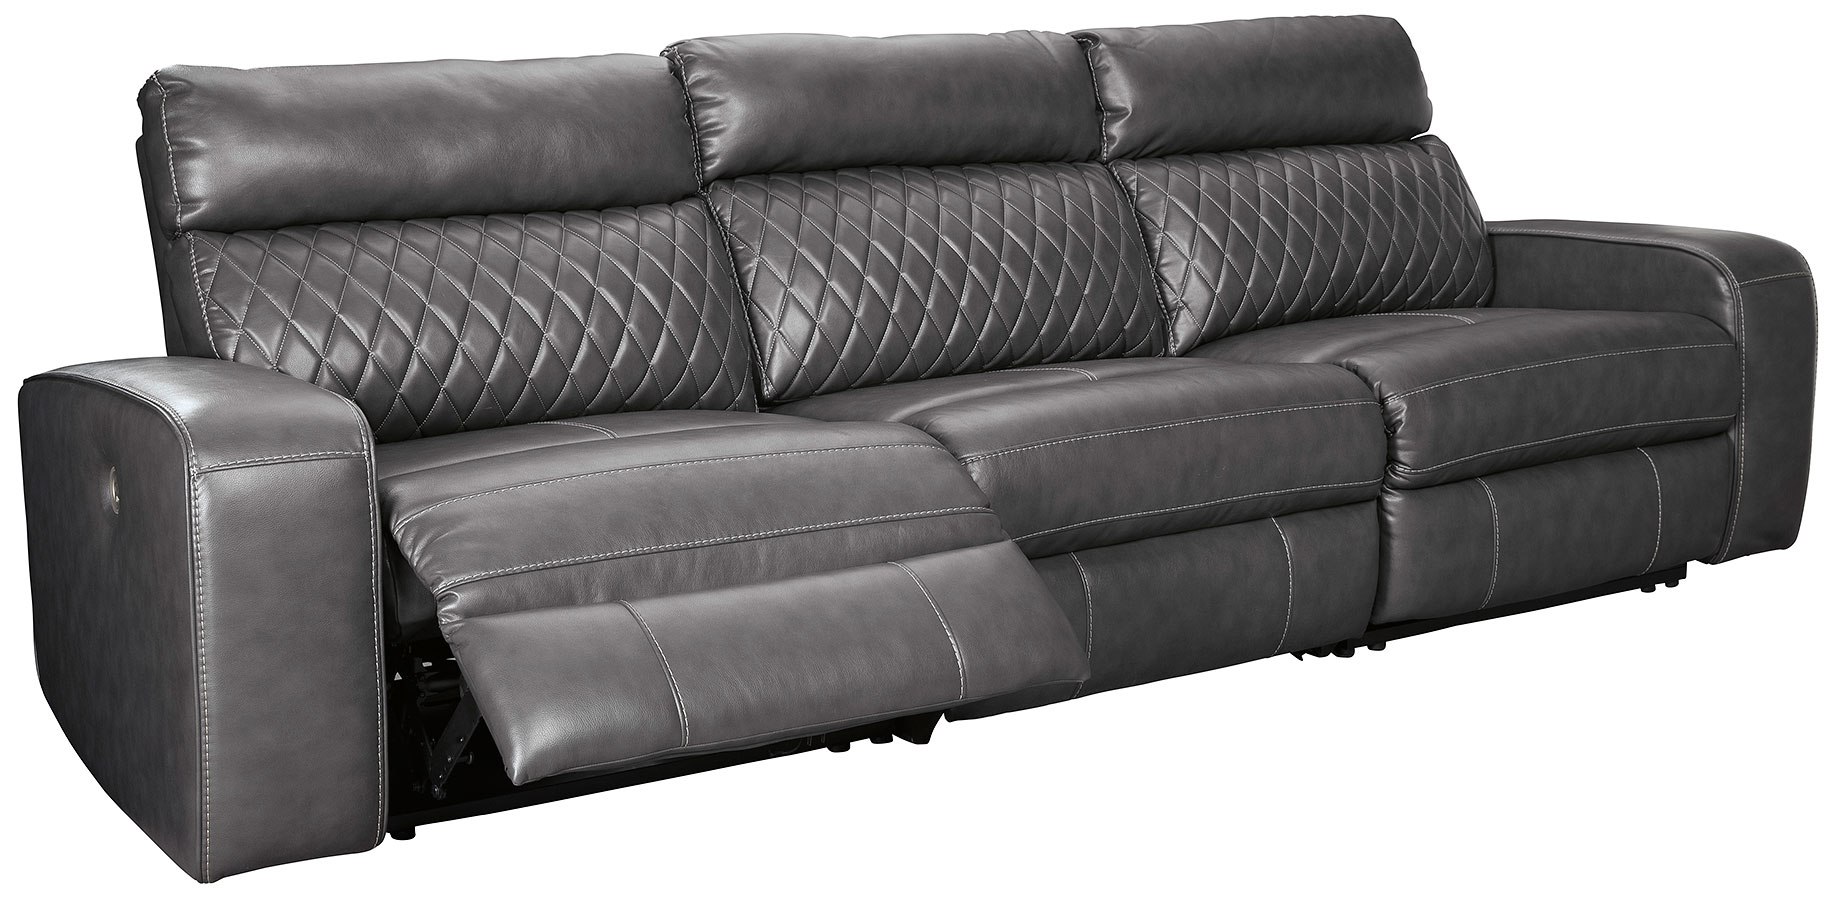 Samperstone Gray Power Reclining Sofa by Signature Design